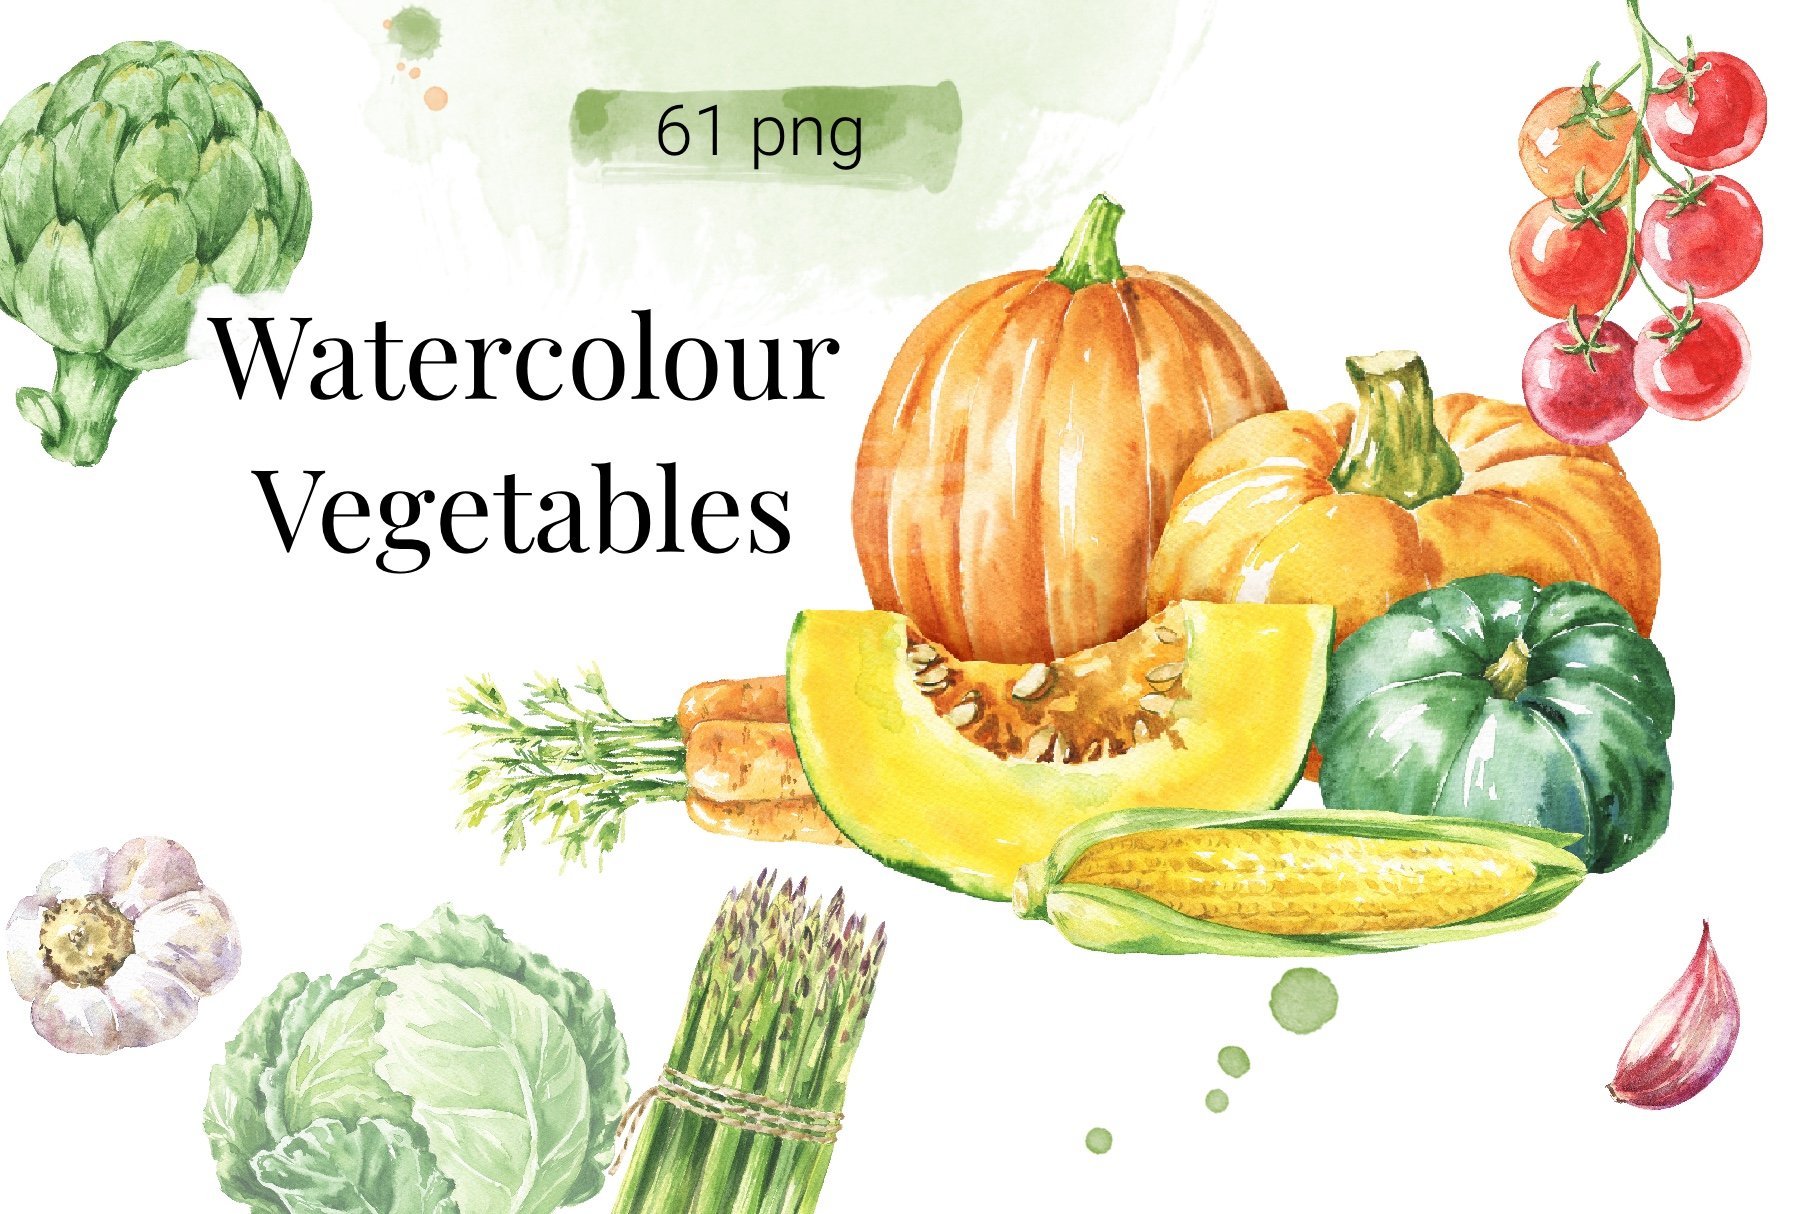 Watercolour Vegetables cover image.